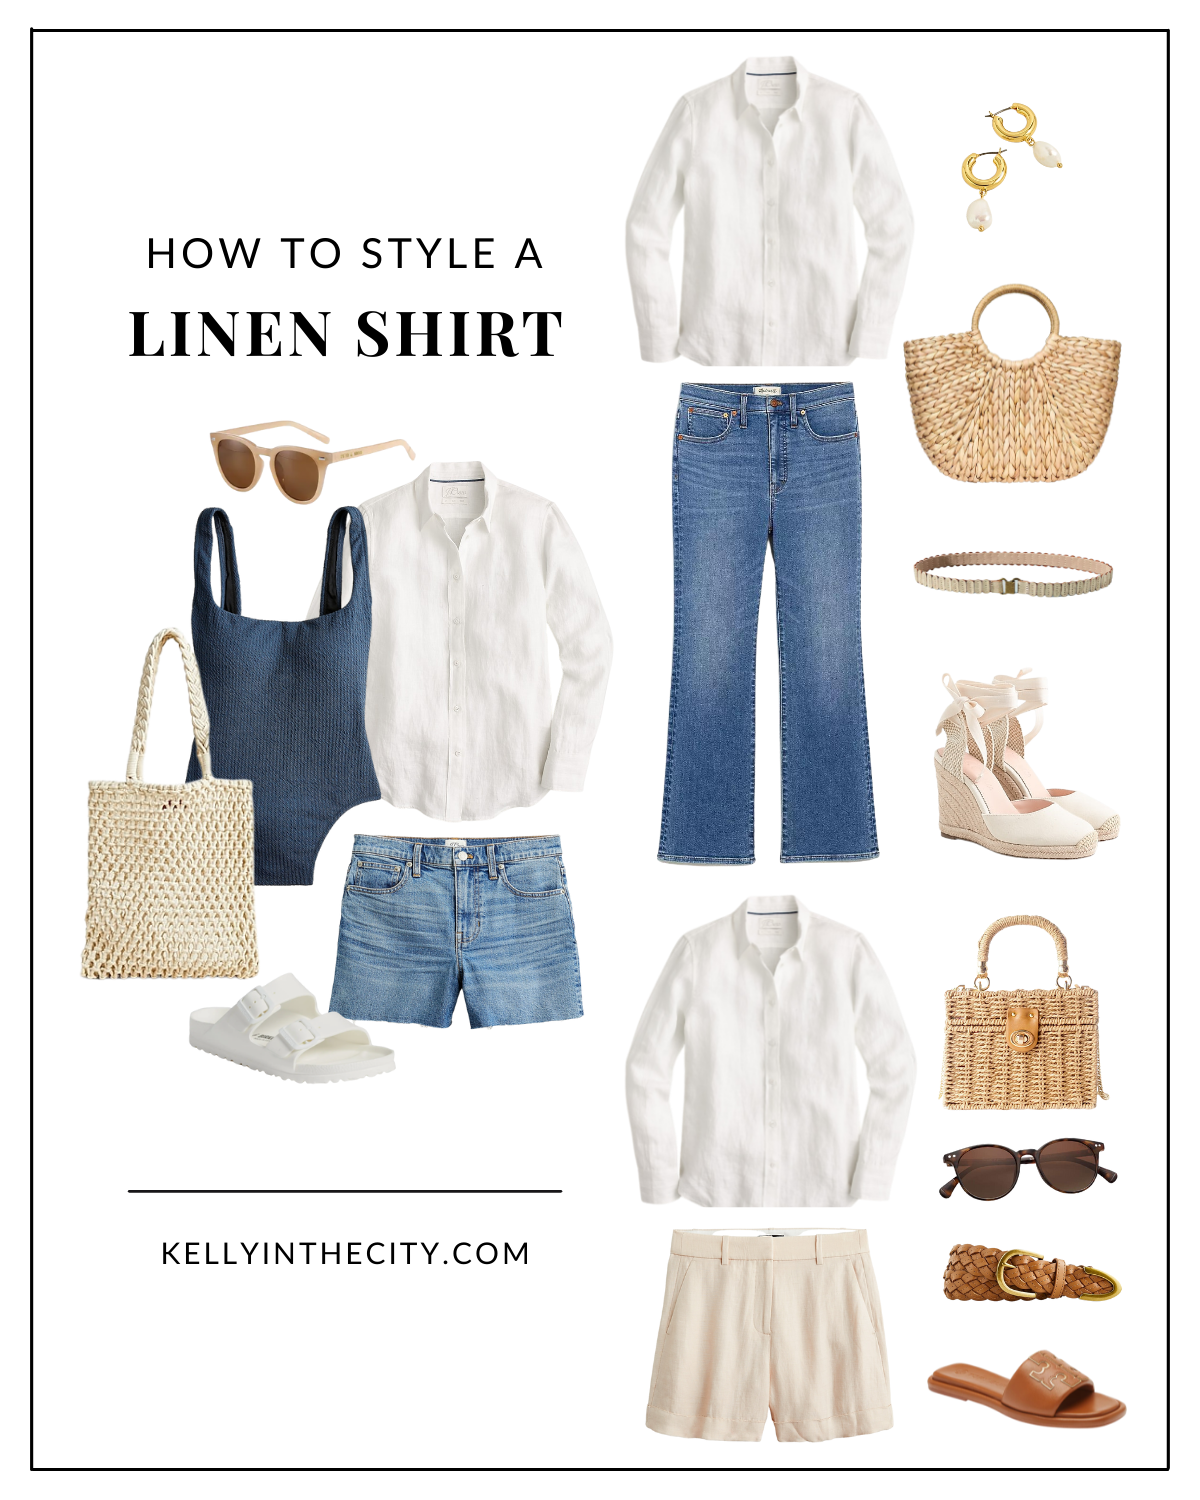 How to Style a Linen Shirt - Kelly in the City | Lifestyle Blog